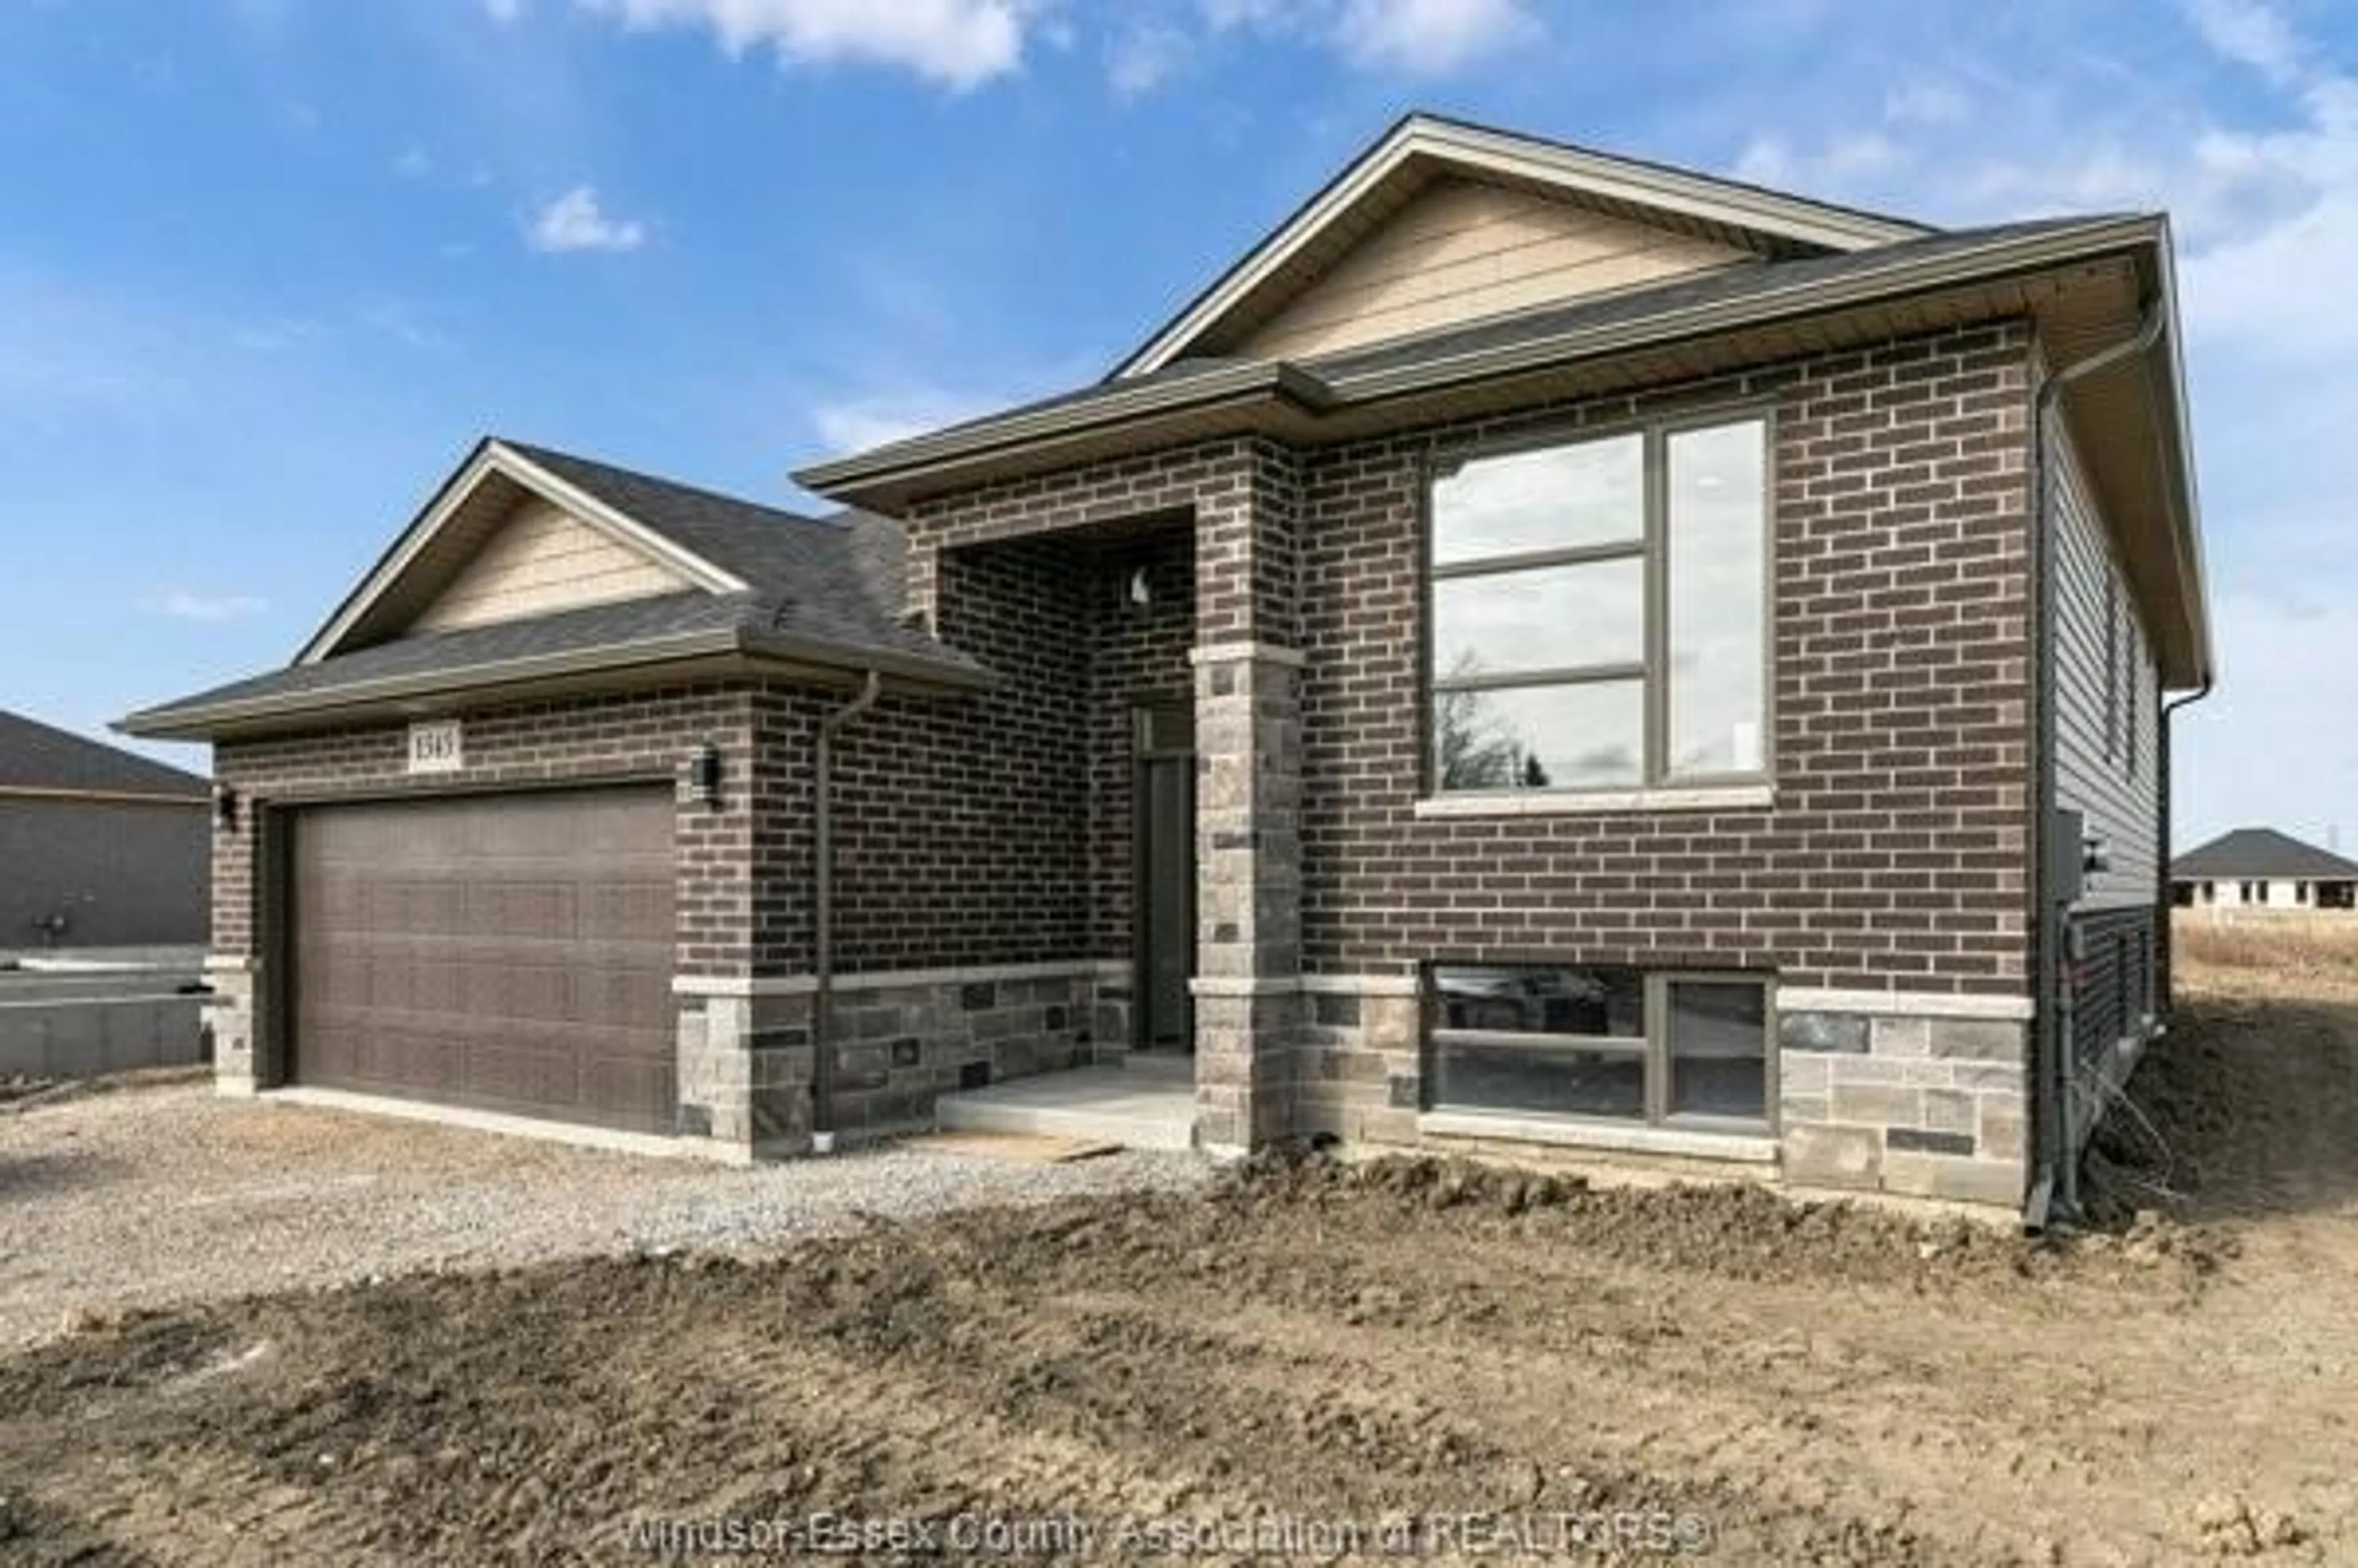 Home with brick exterior material for 38 KINGSBRIDGE, Amherstburg Ontario N9V 4A4